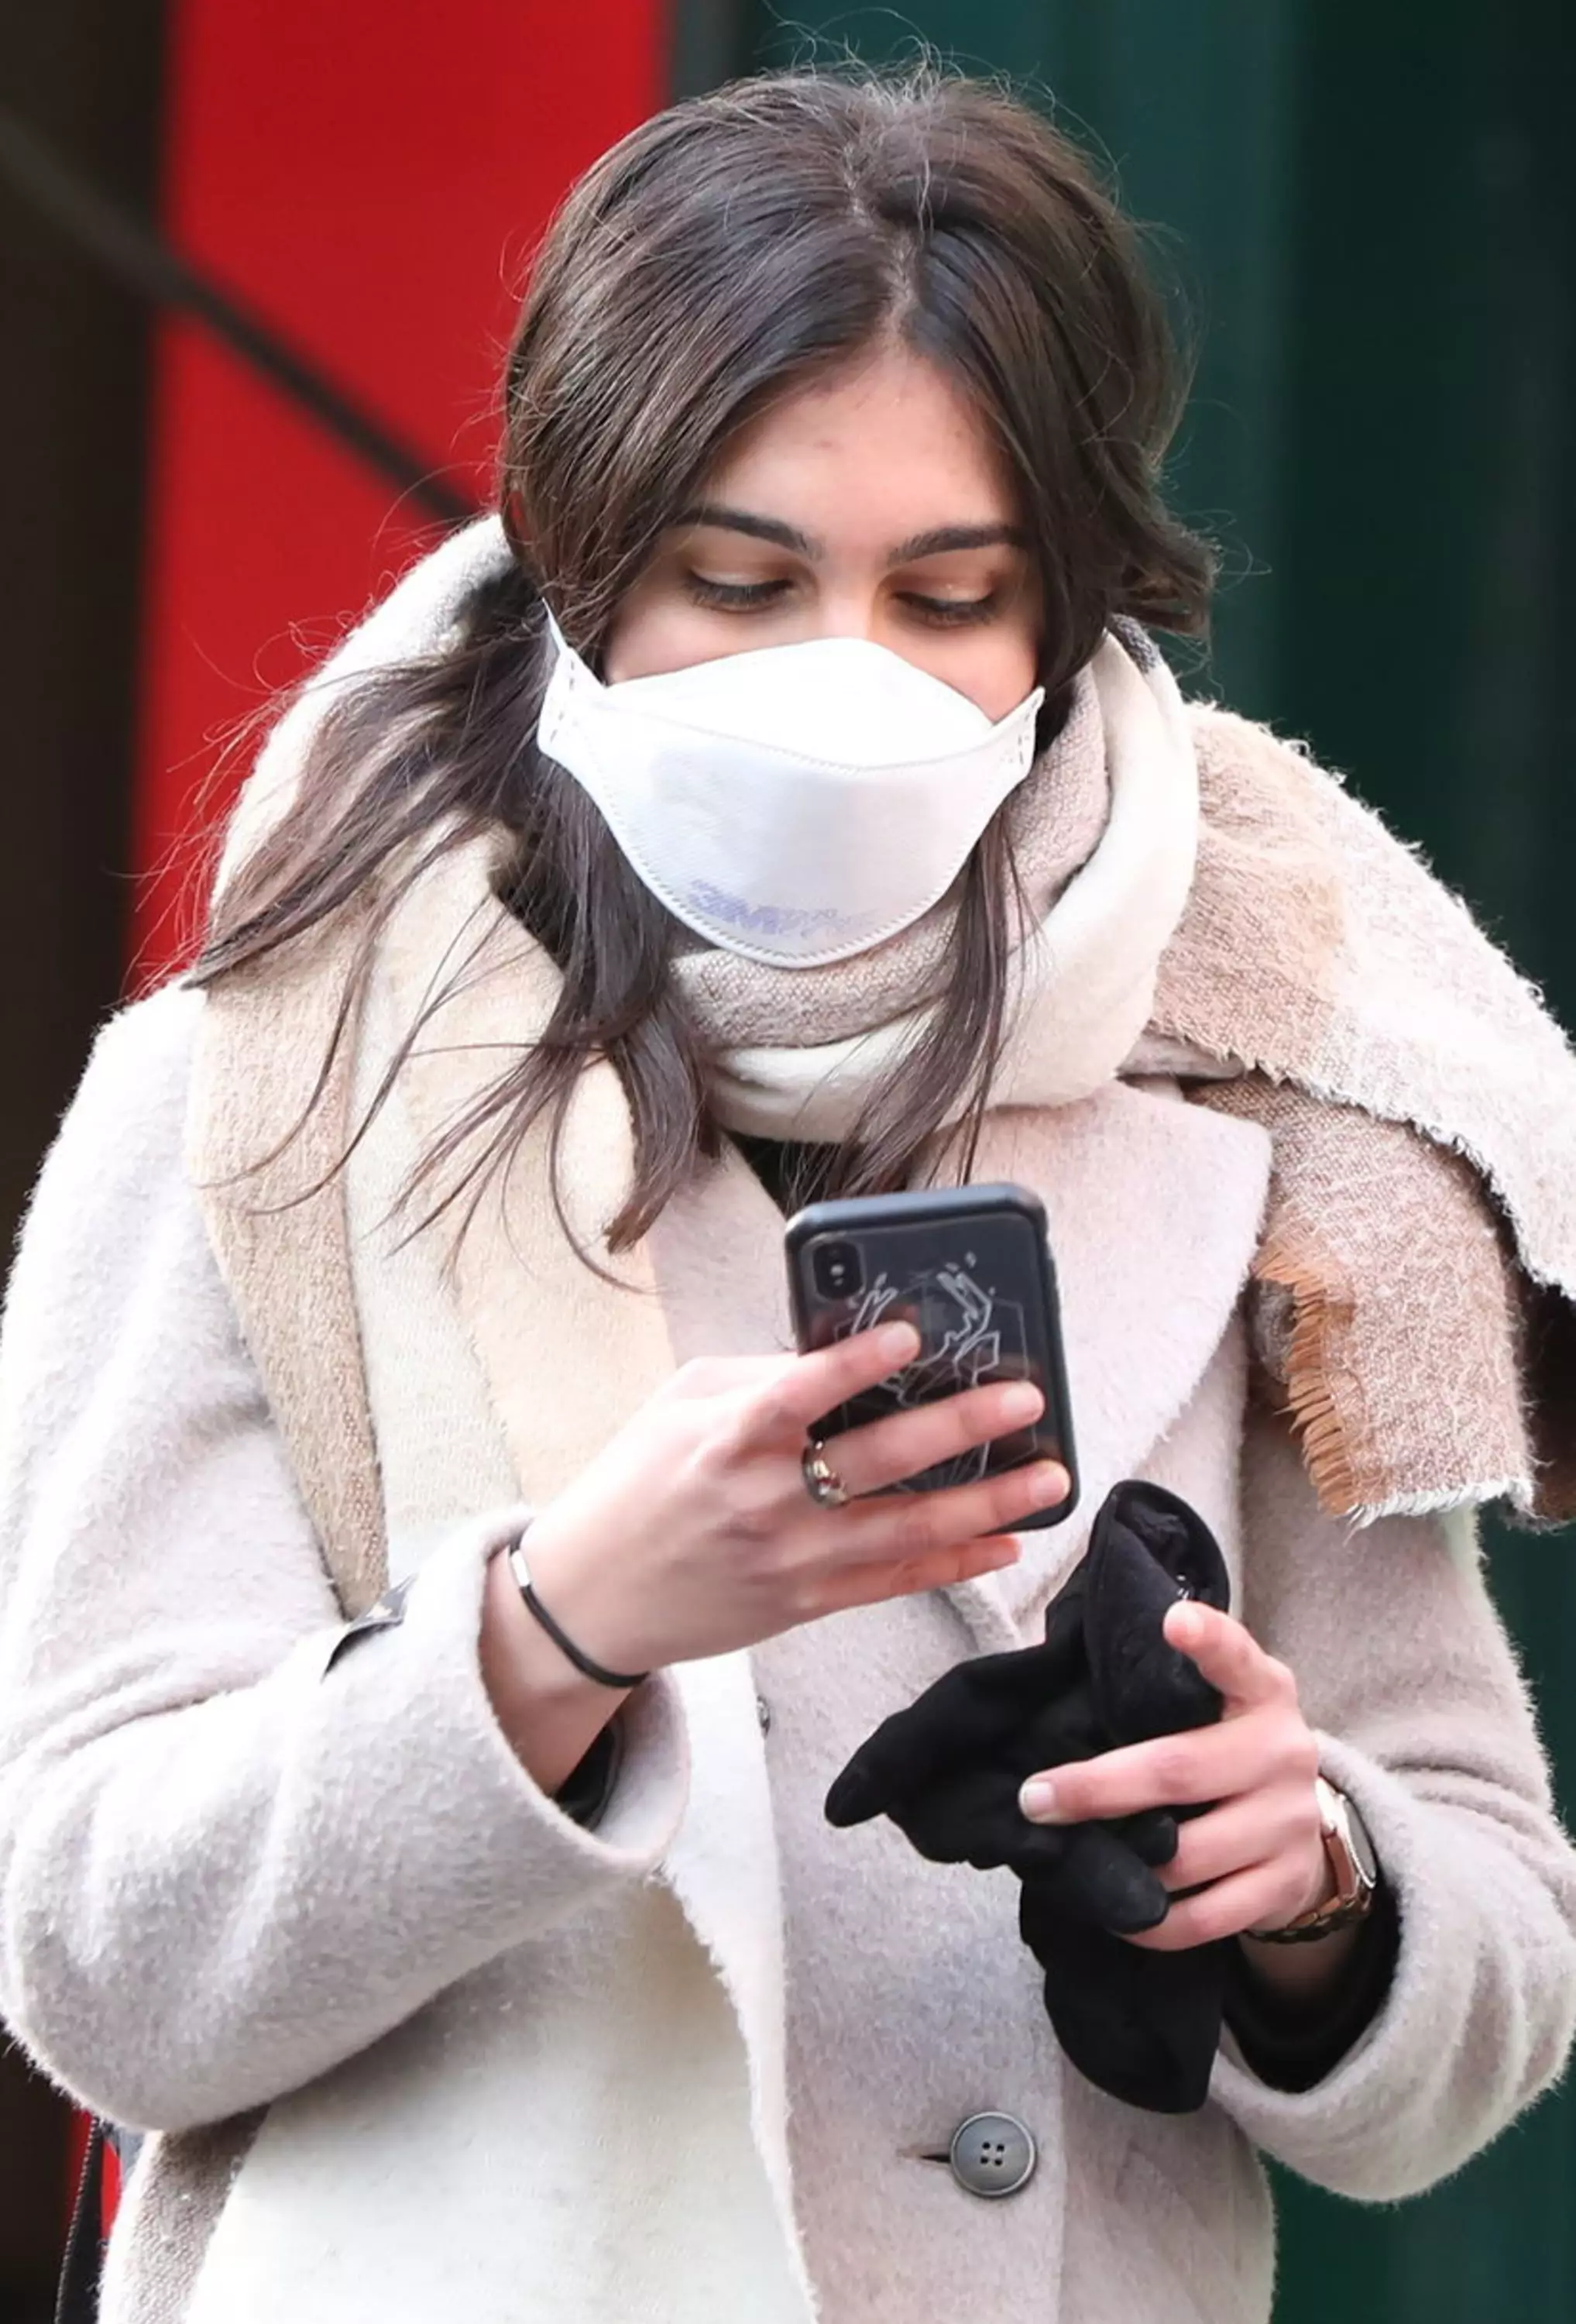 People have started to wear face masks in public.